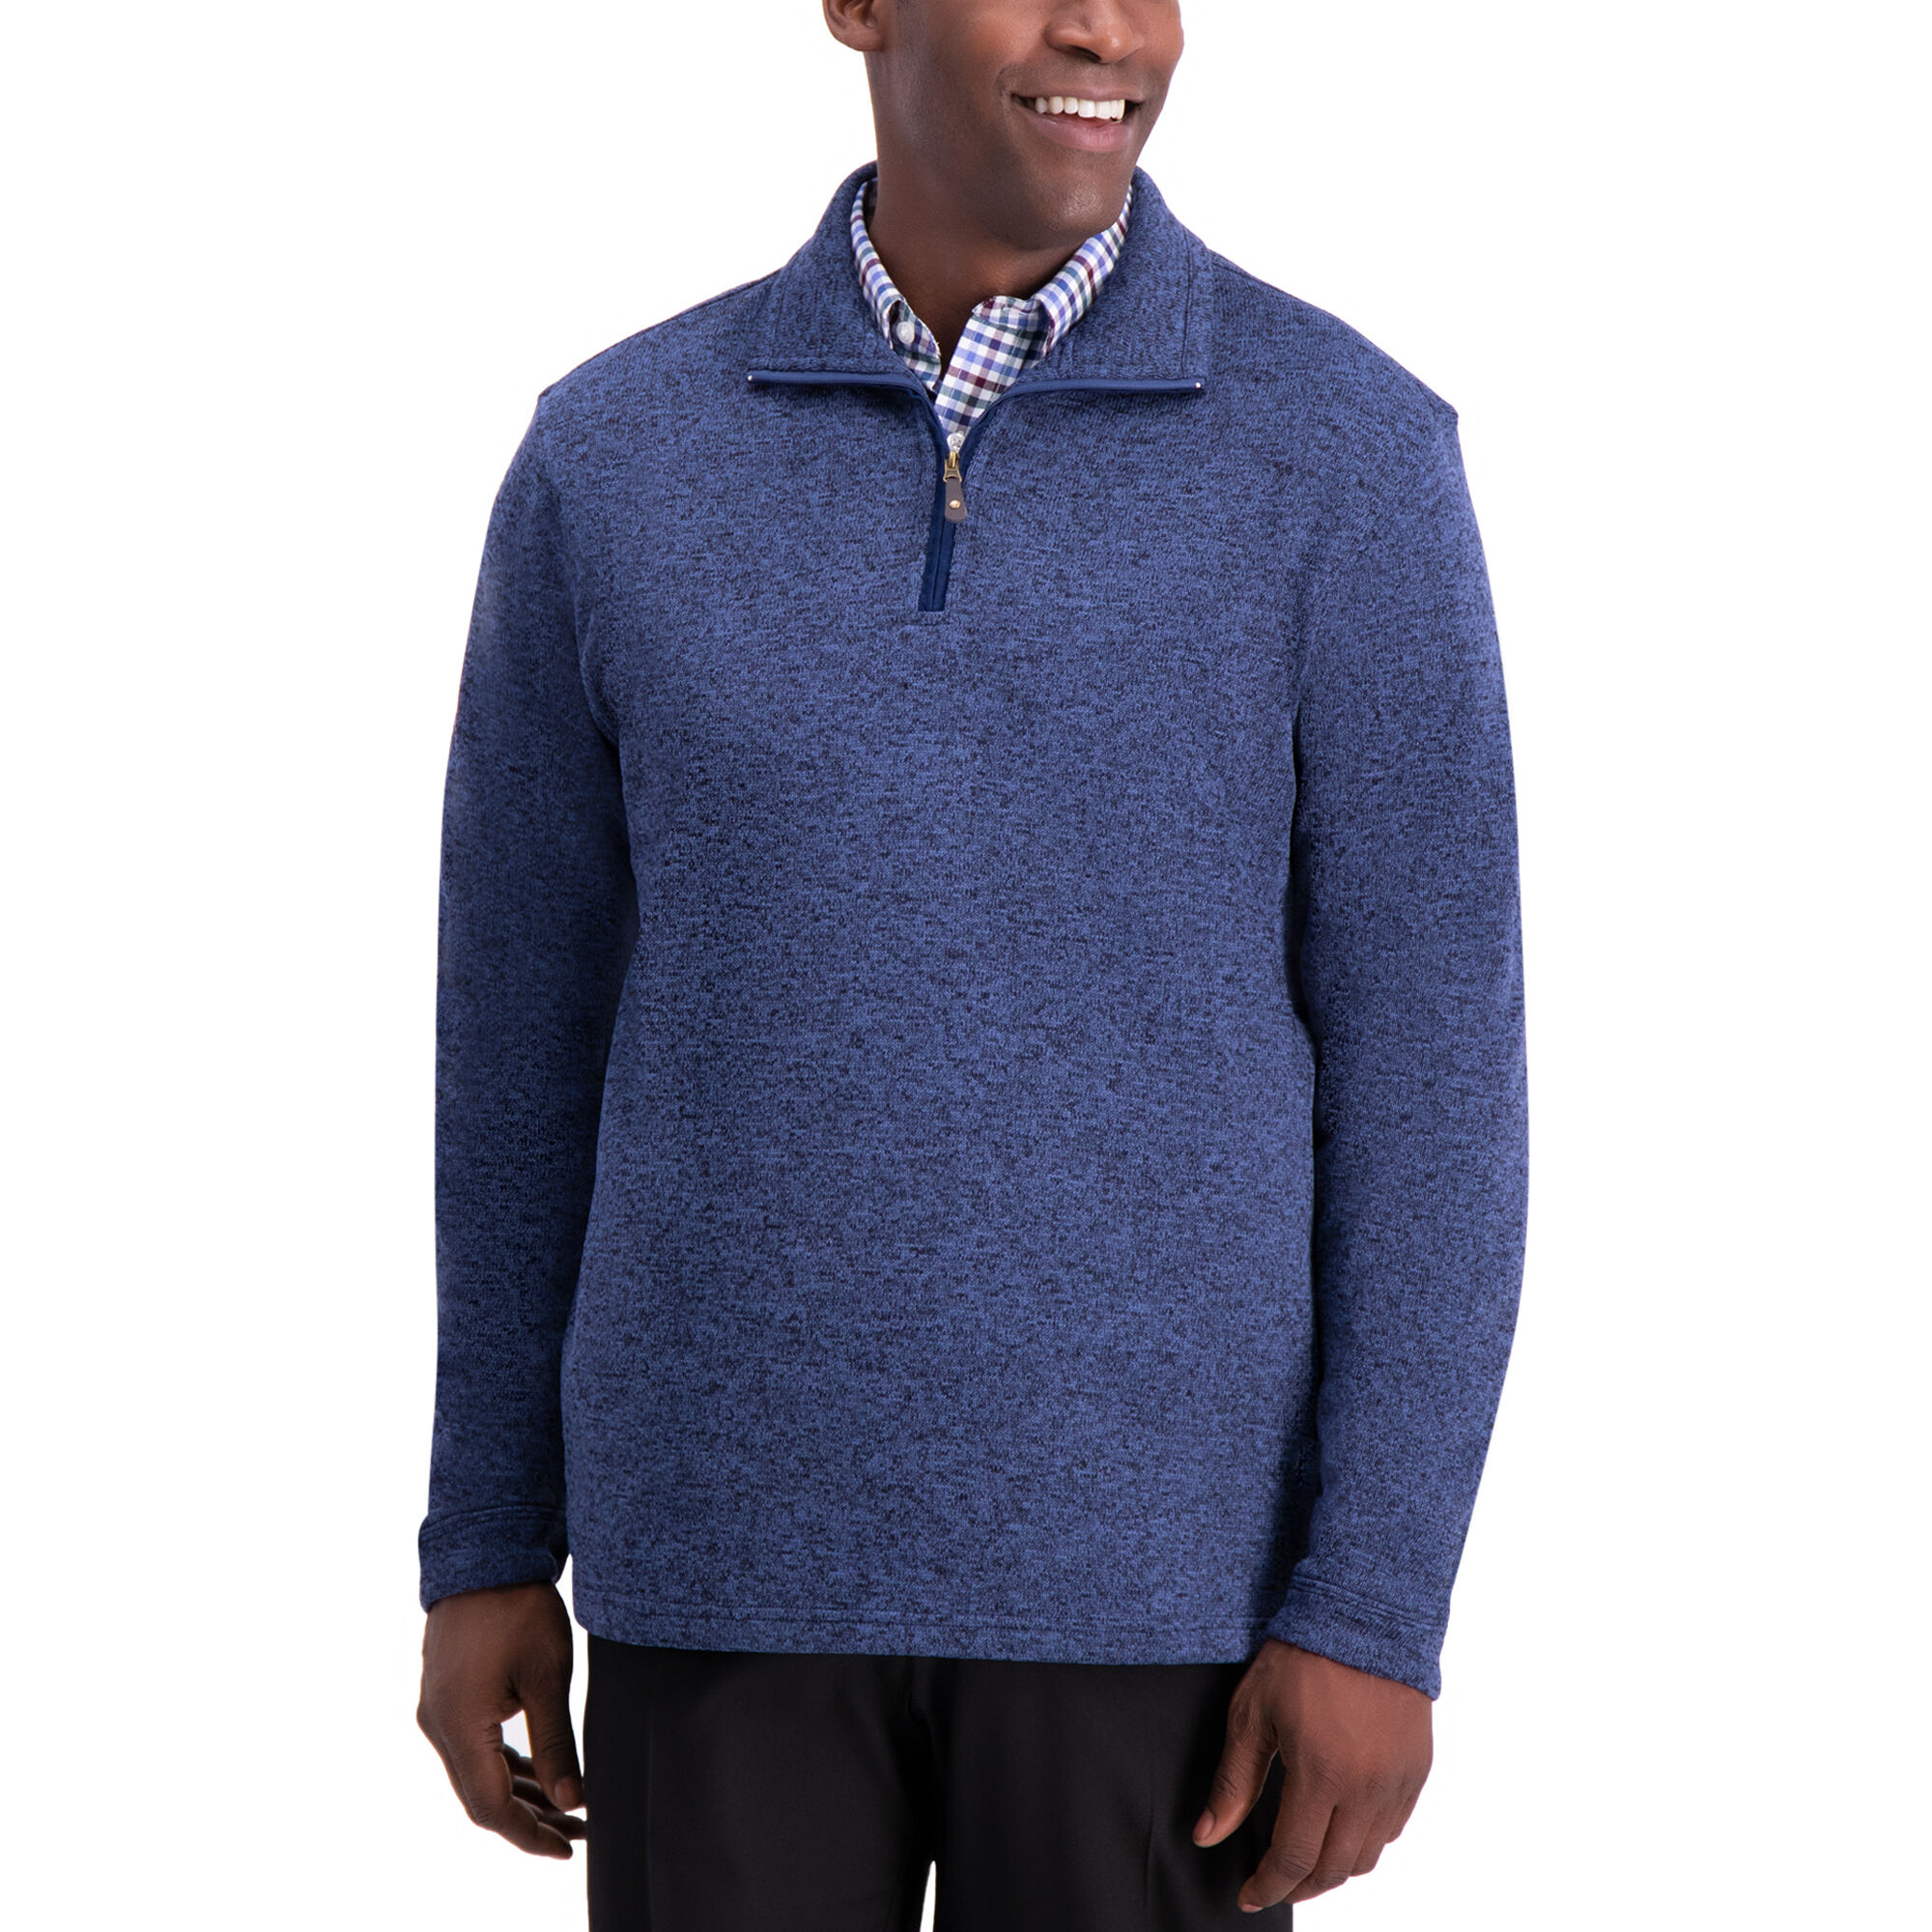 Haggar 1/4 Zip Knit Fleece Sweater Peacoat 1/4 Zip Marled with Faux Suede 100% Polyester Machine Washable Imported Style #: 037301 Size - S